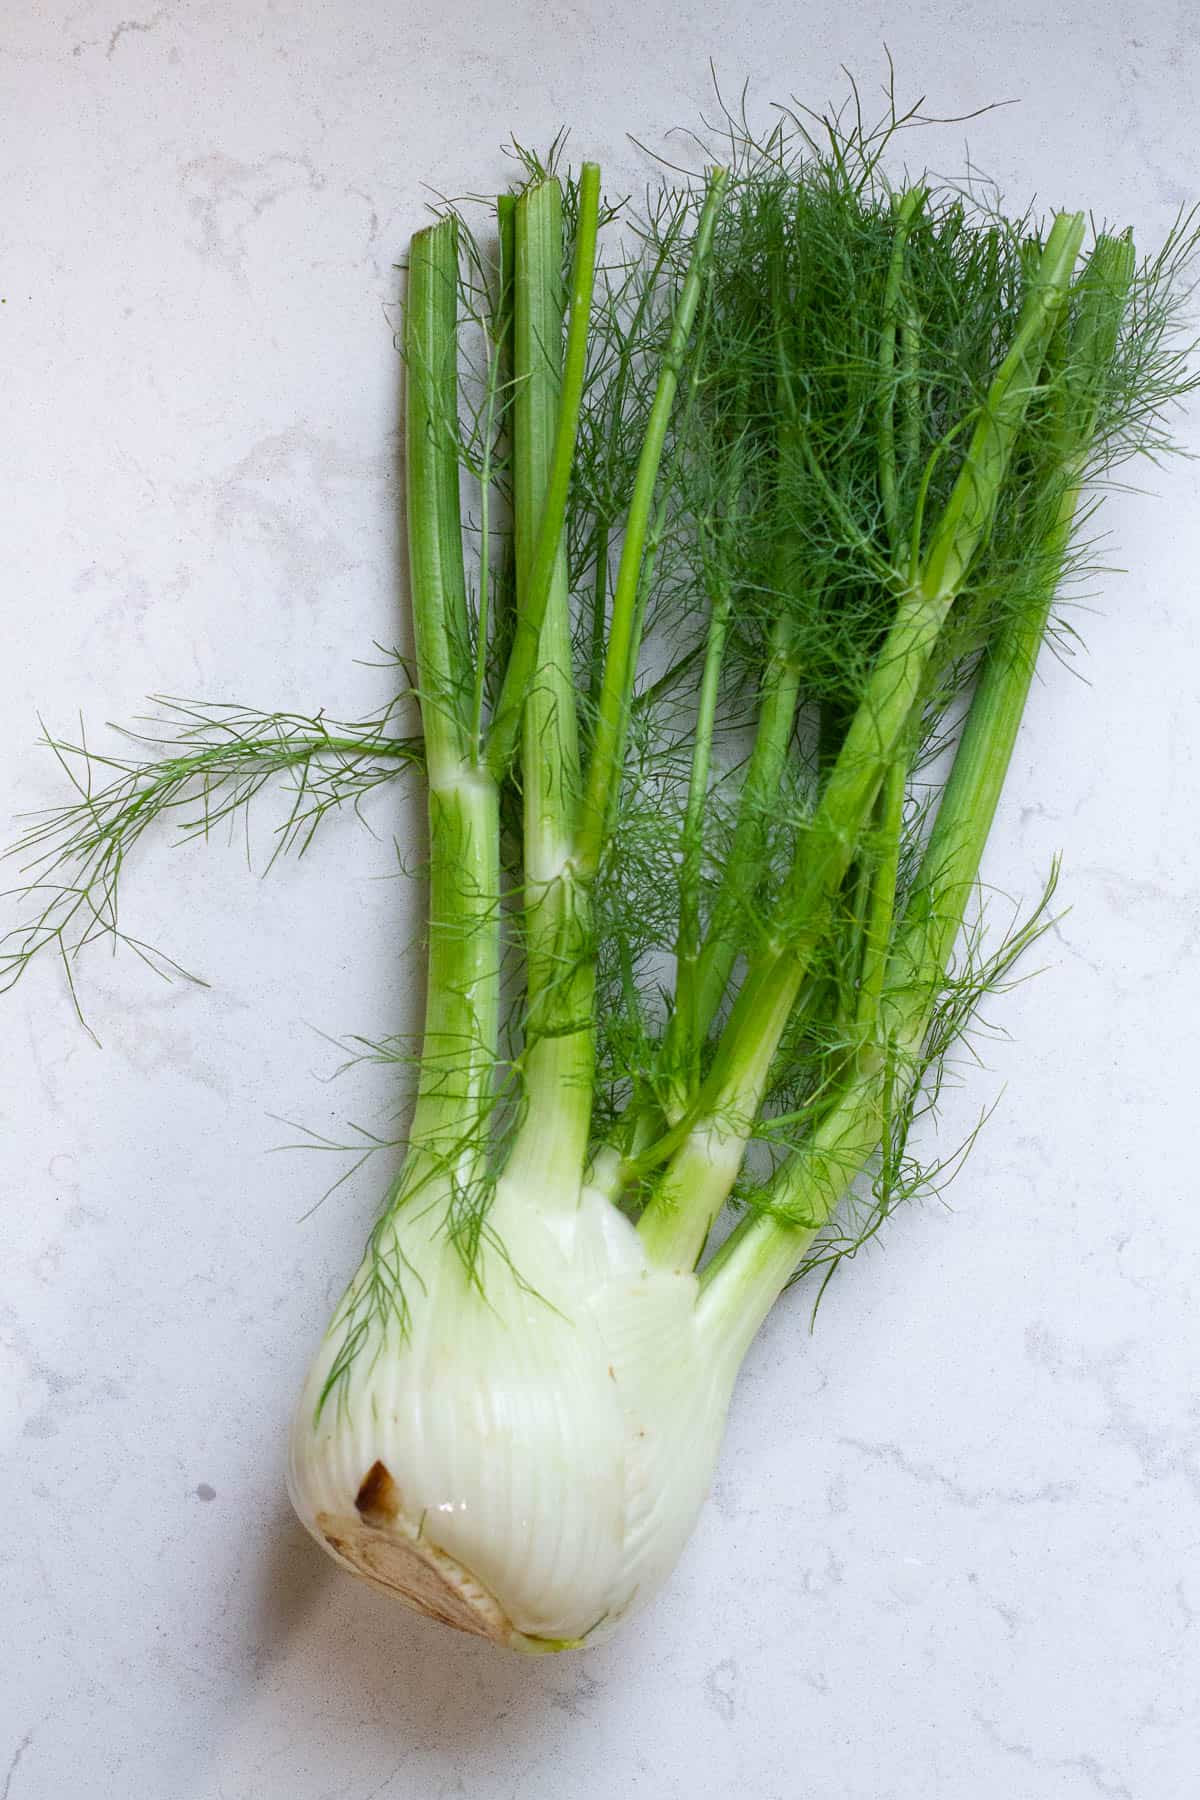 Top view of fennel.